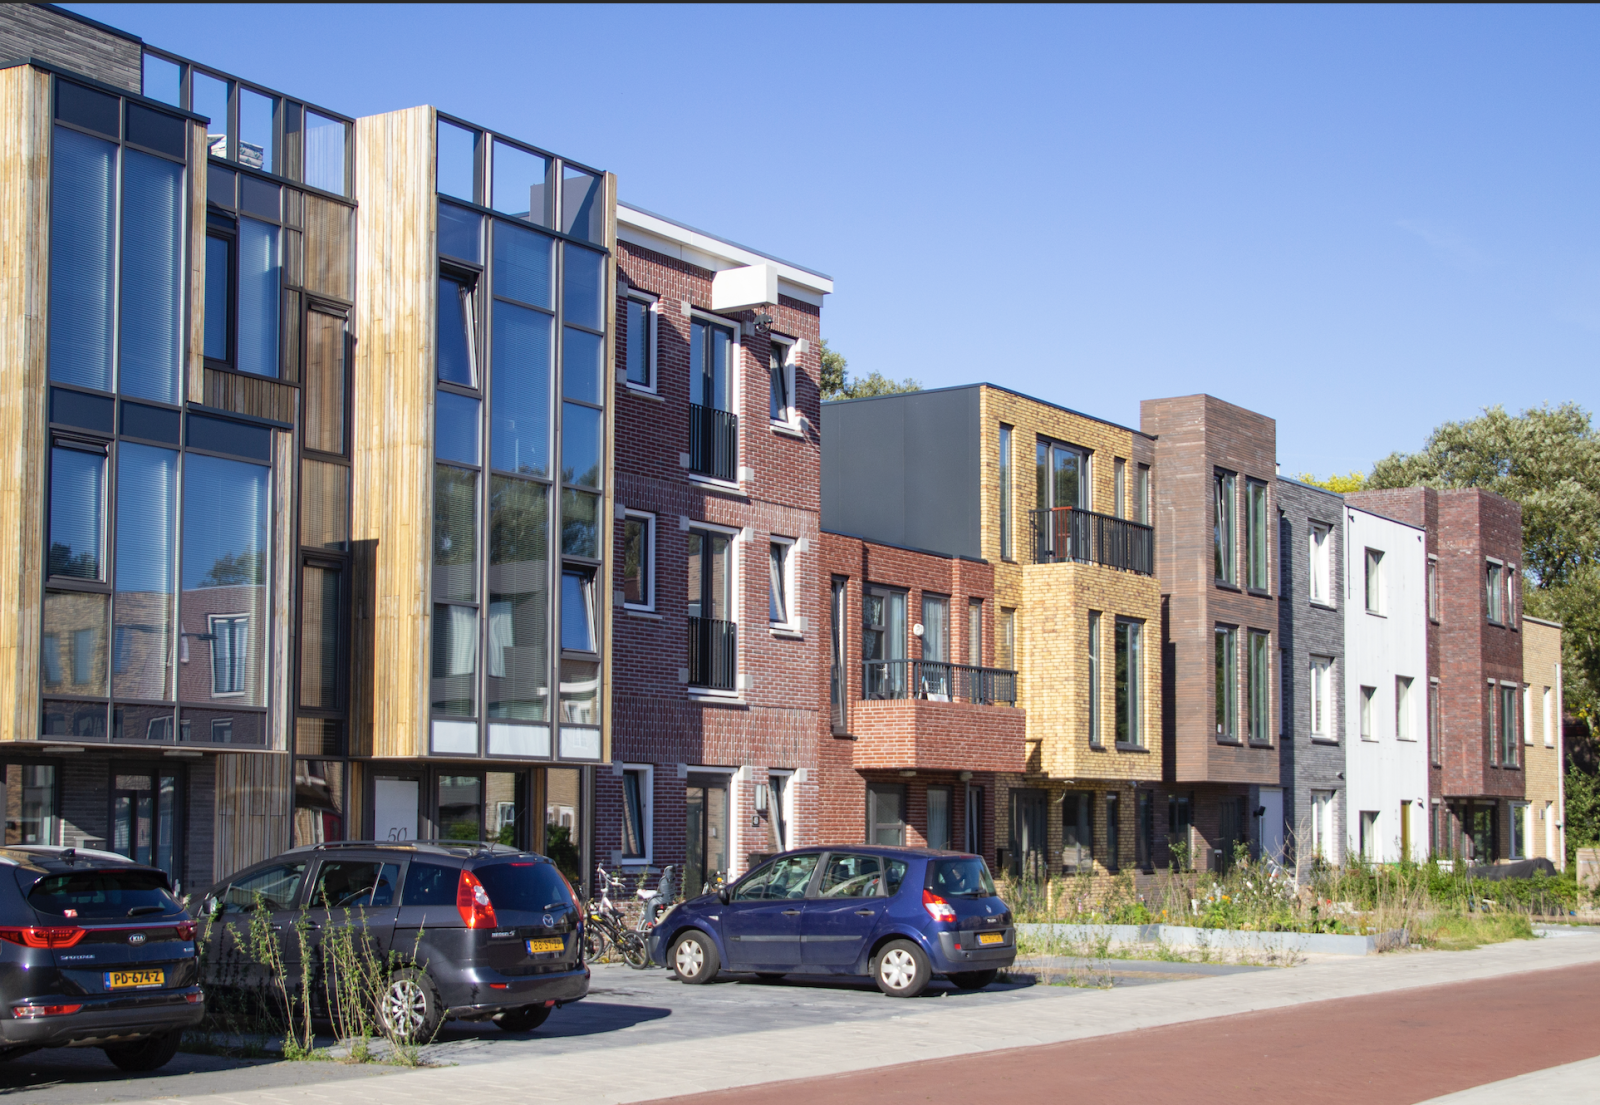 Self build terraces in the Netherlands